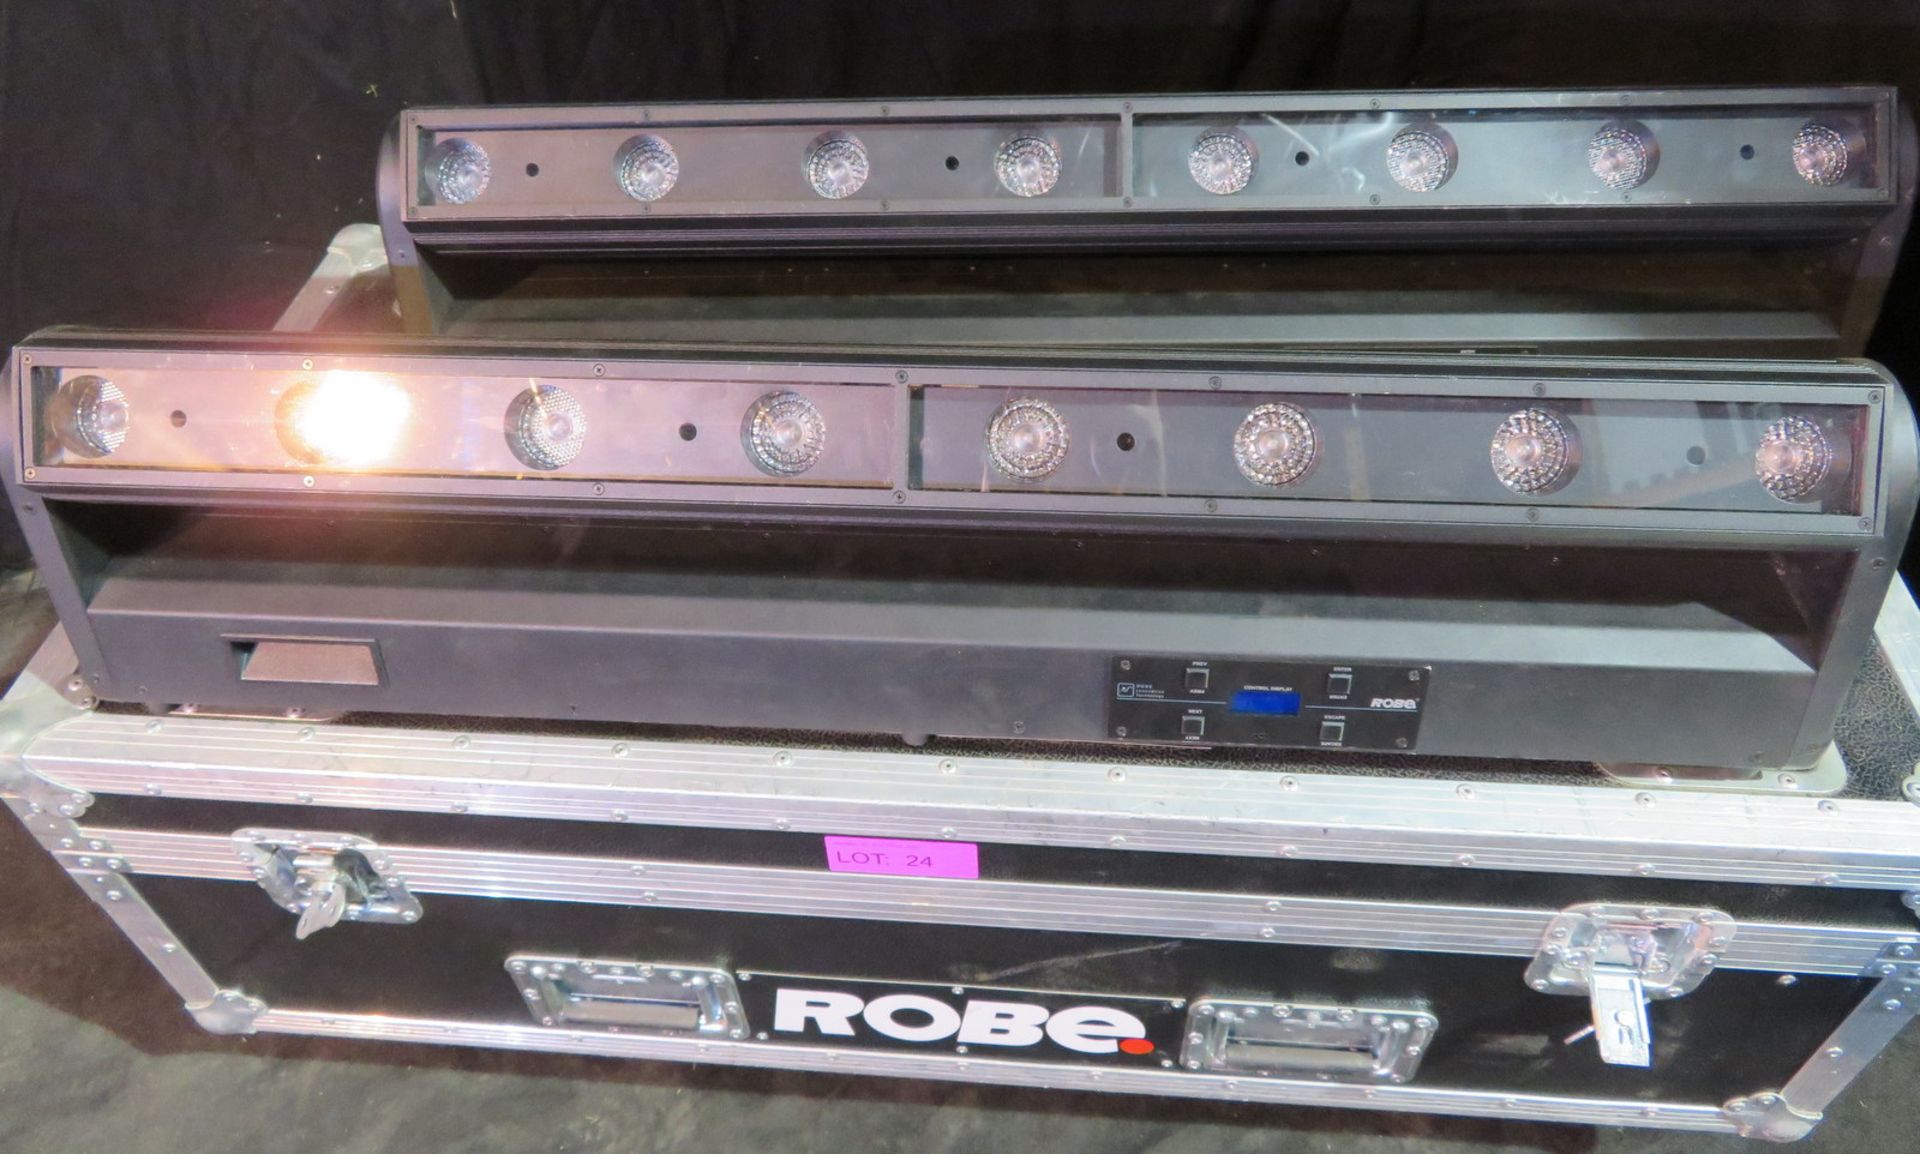 Pair of Robe CycFX8 in twin flightcase - Power hours: 9155 & 9037 - working - Image 2 of 11